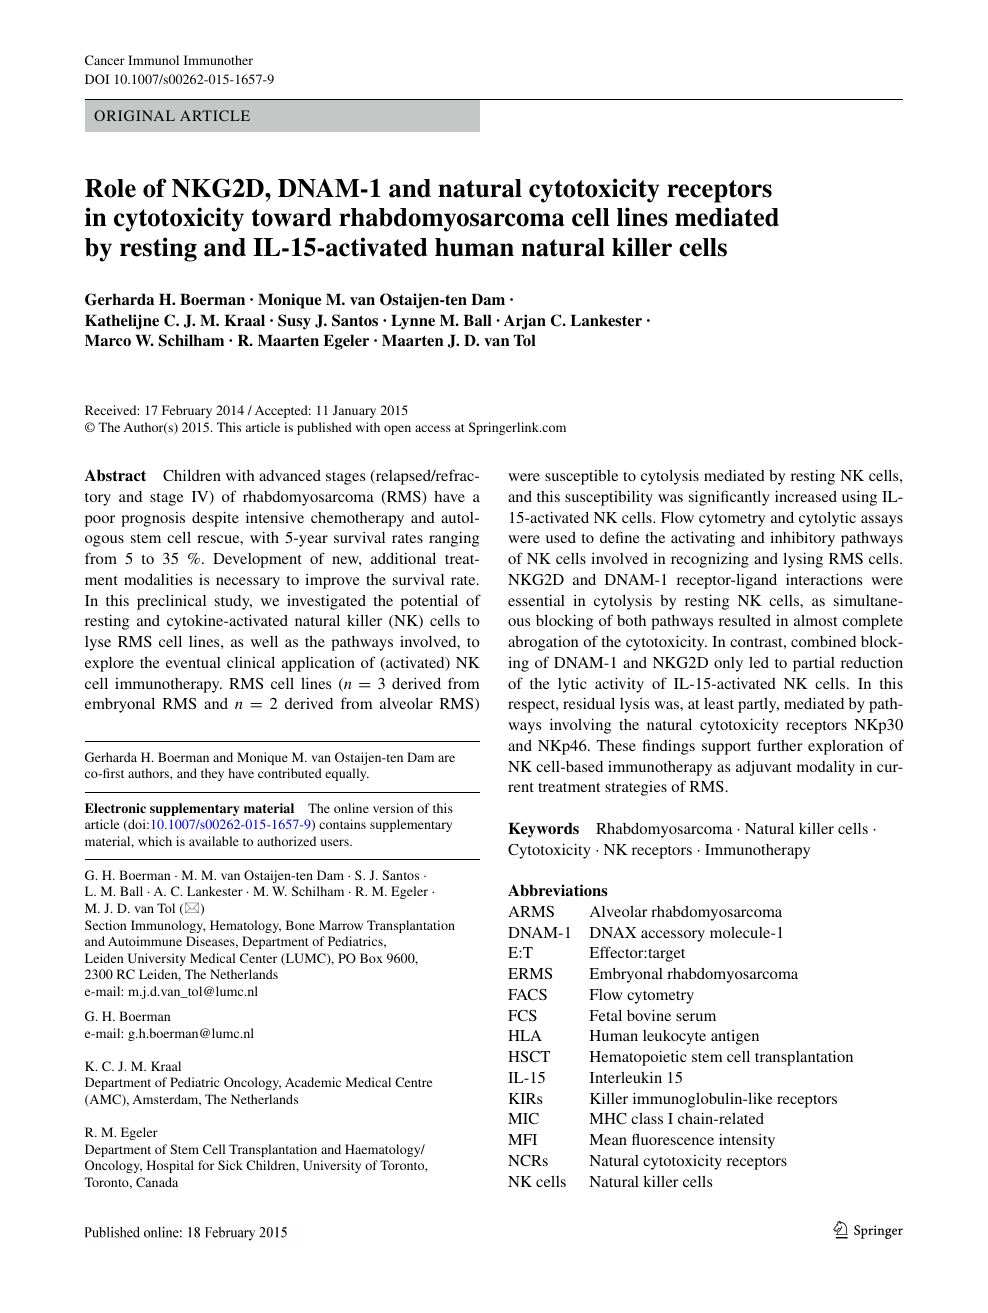 Role Of Nkg2d Dnam 1 And Natural Cytotoxicity Receptors In Cytotoxicity Toward Rhabdomyosarcoma Cell Lines Mediated By Resting And Il 15 Activated Human Natural Killer Cells Topic Of Research Paper In Clinical Medicine Download